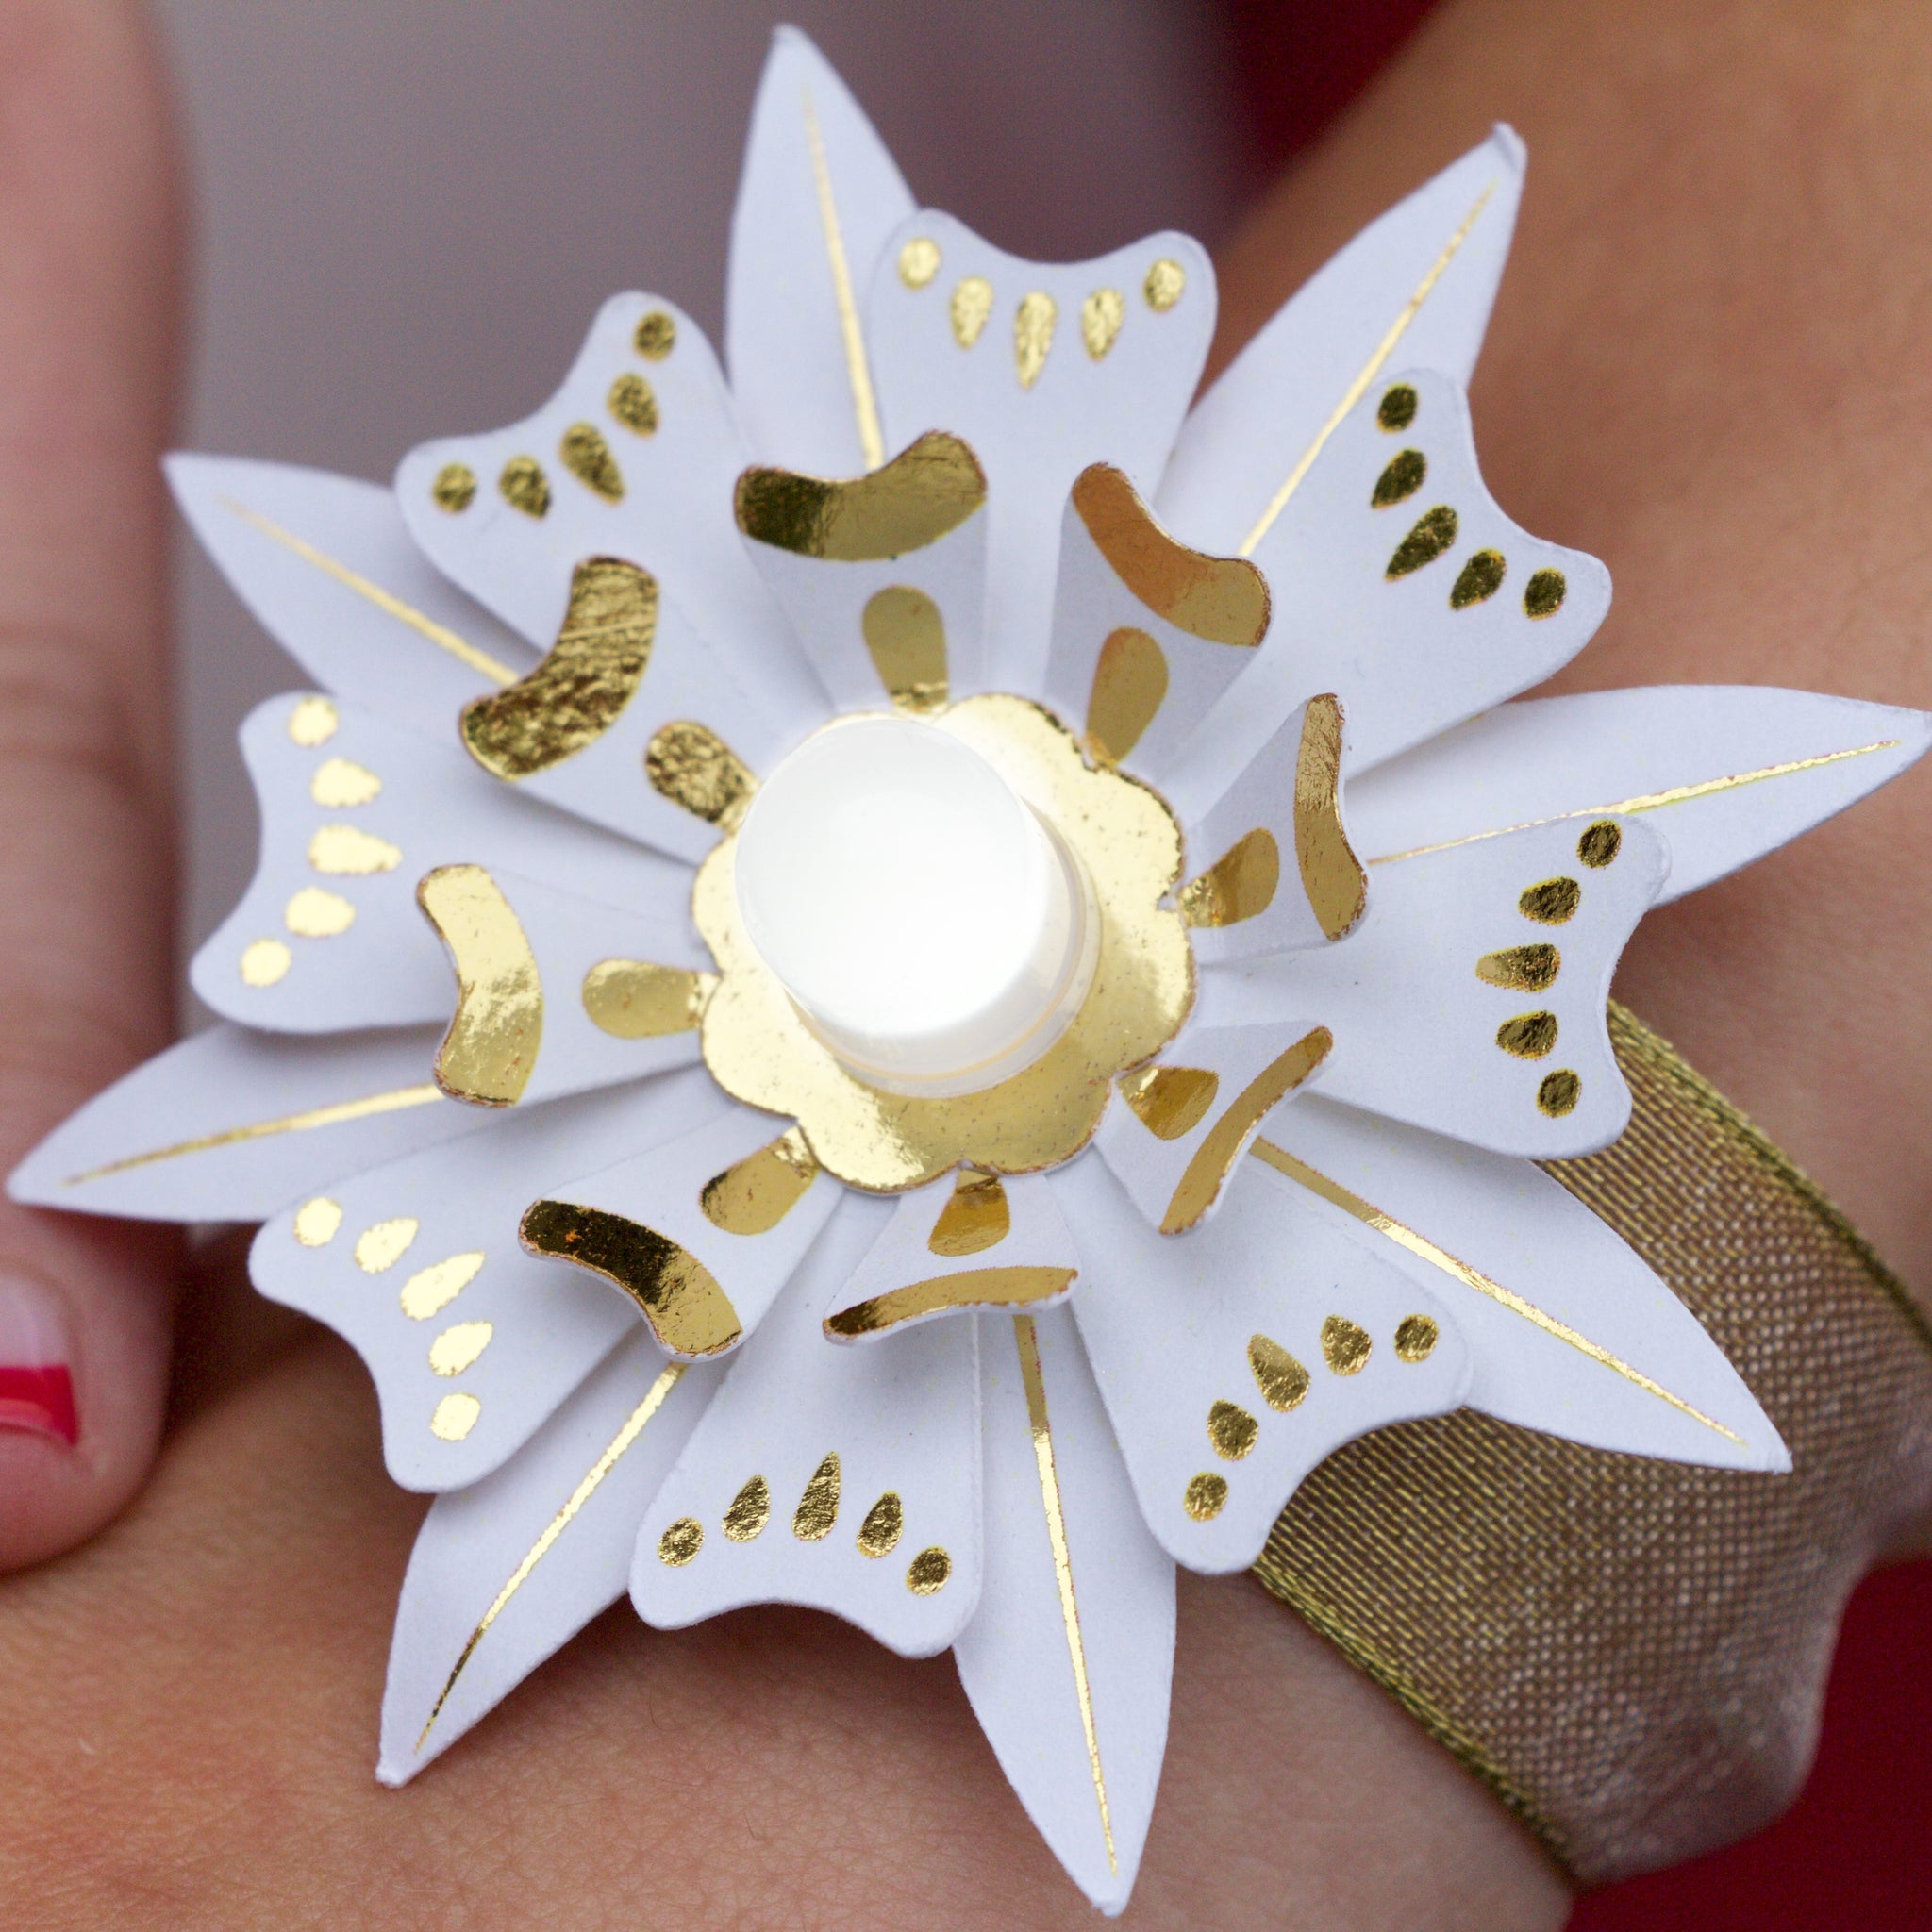 DIY Light Up Flashy Flowers Kit - Makes 10 Projects